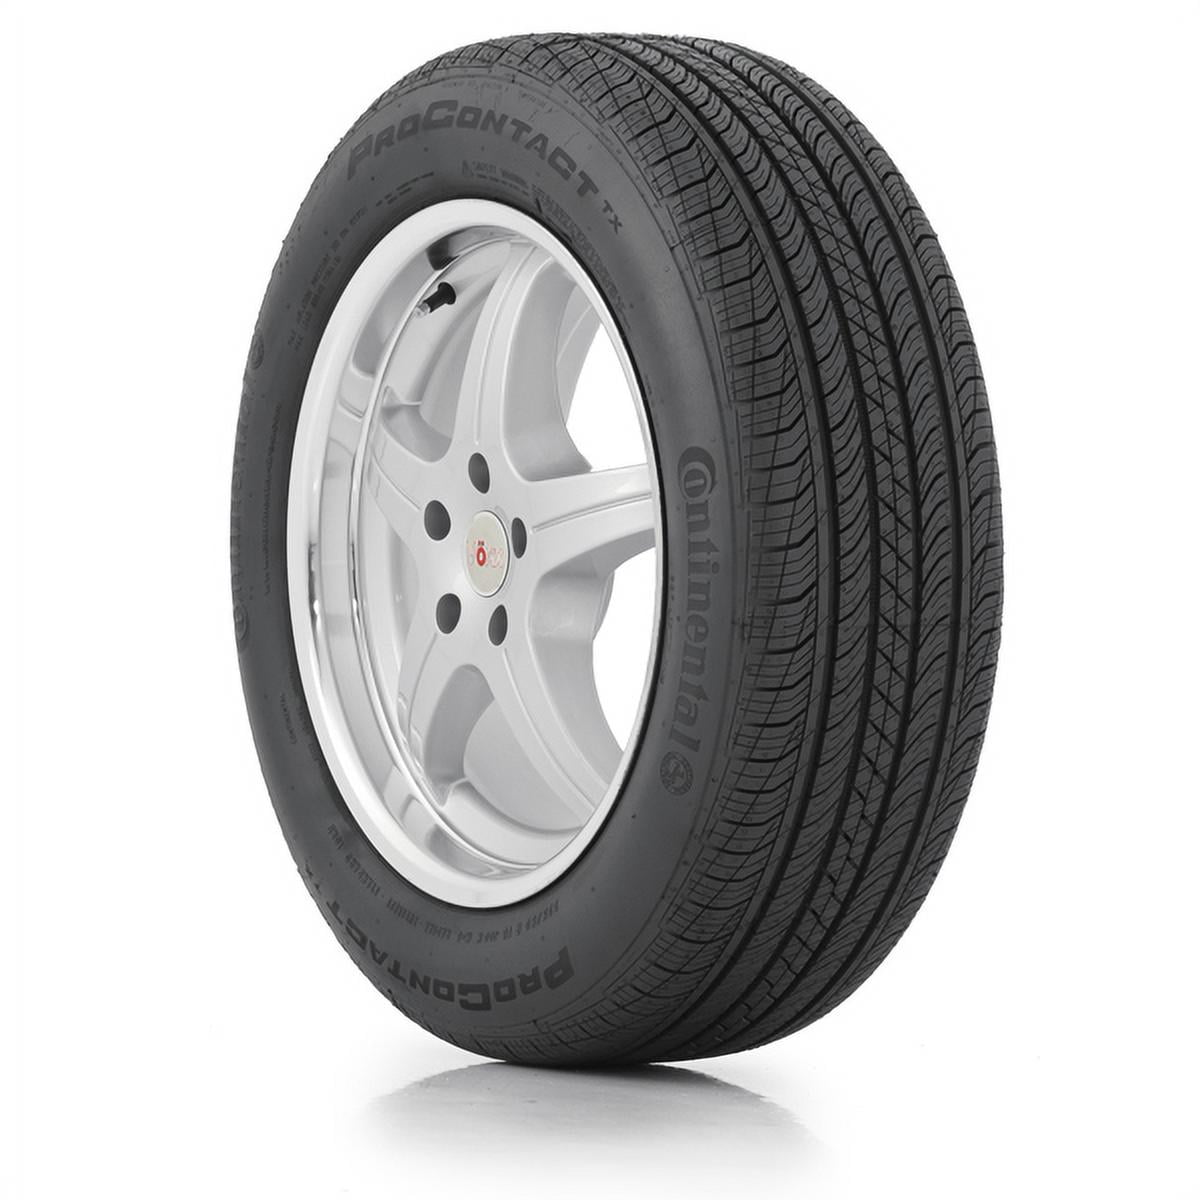 Continental Pro Contact TX Performance Radial Tire 245/45R18 100V 